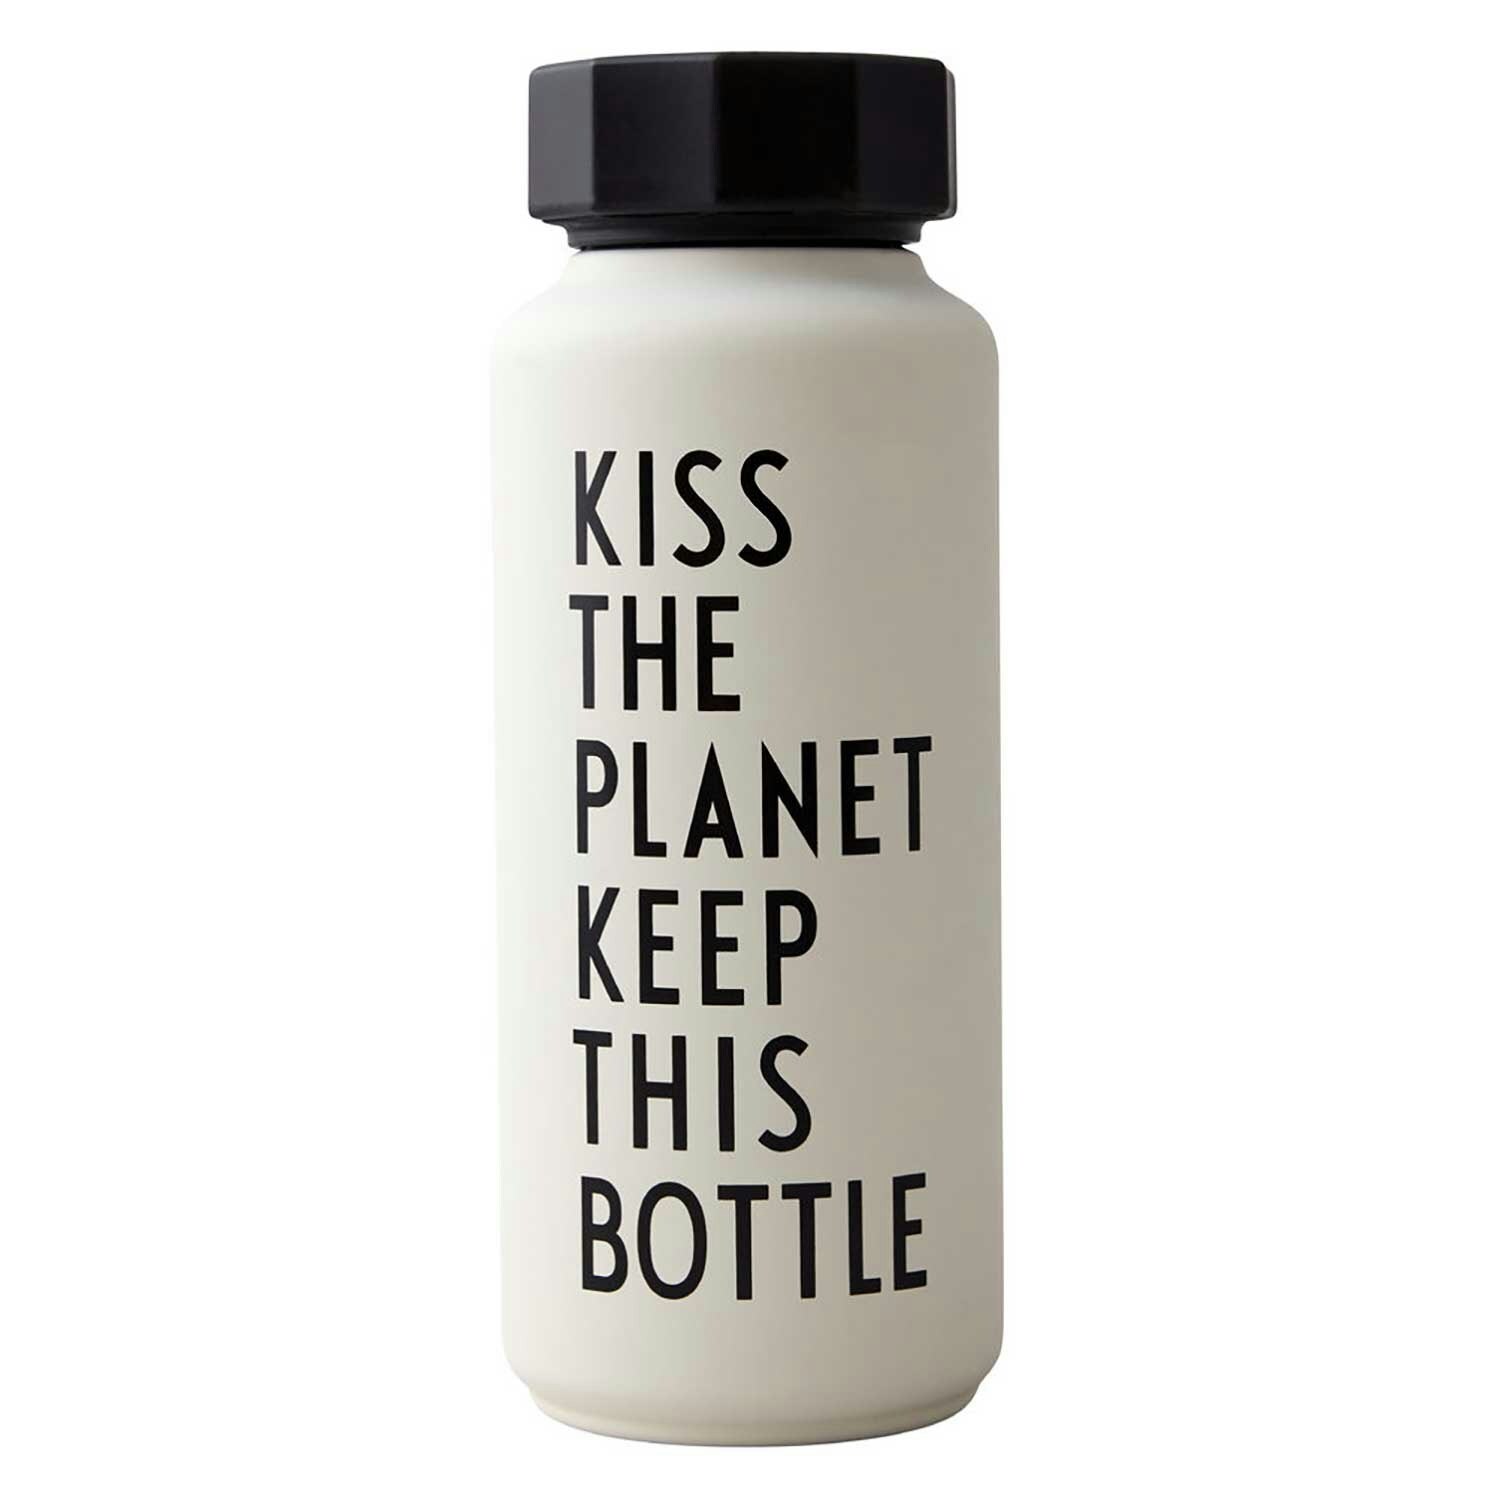 https://royaldesign.com/image/2/design-letters-thermo-bottle-special-edition-2